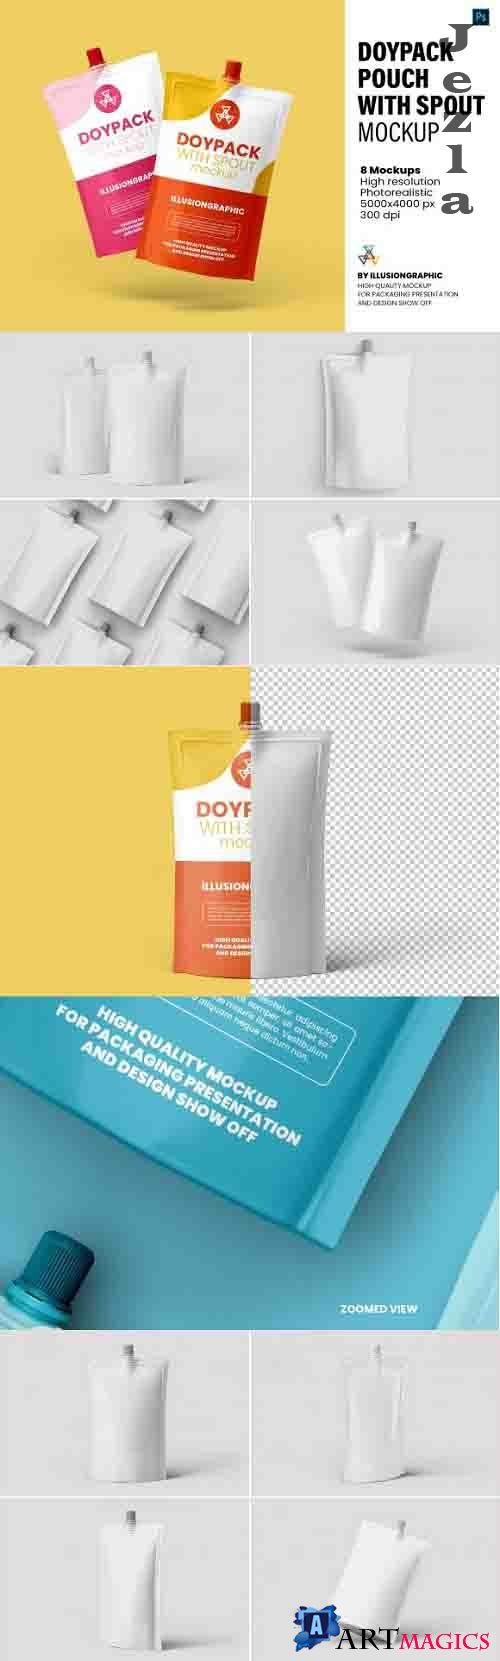 Doypack Pouch with Spout Mockup - 8 View